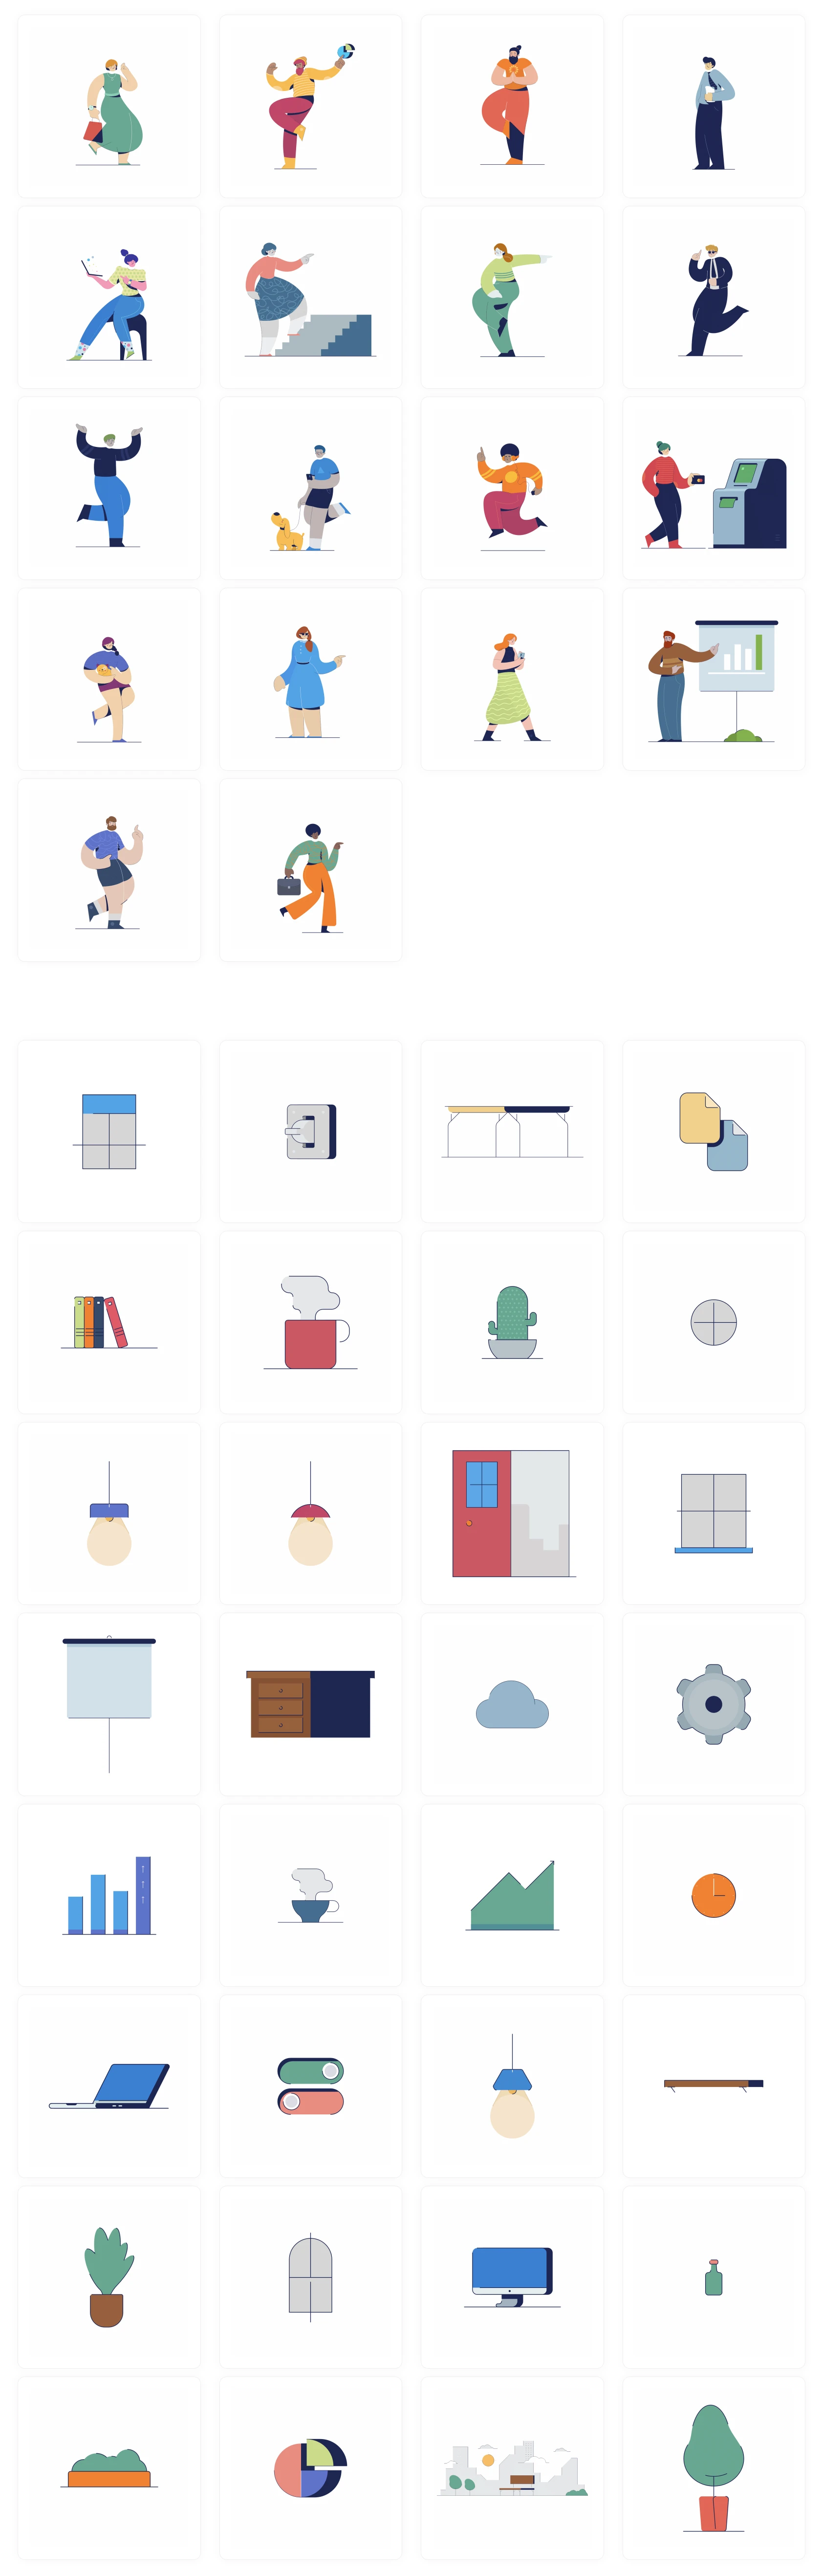 Daily - 50 Free Illustrations - Free simple illustration scene builder offering a collection of characters and environment objects all drawn in flat style. Combine these beautifully drawn people together with some of the background elements to create inspiring scenes for website interface or application screens.